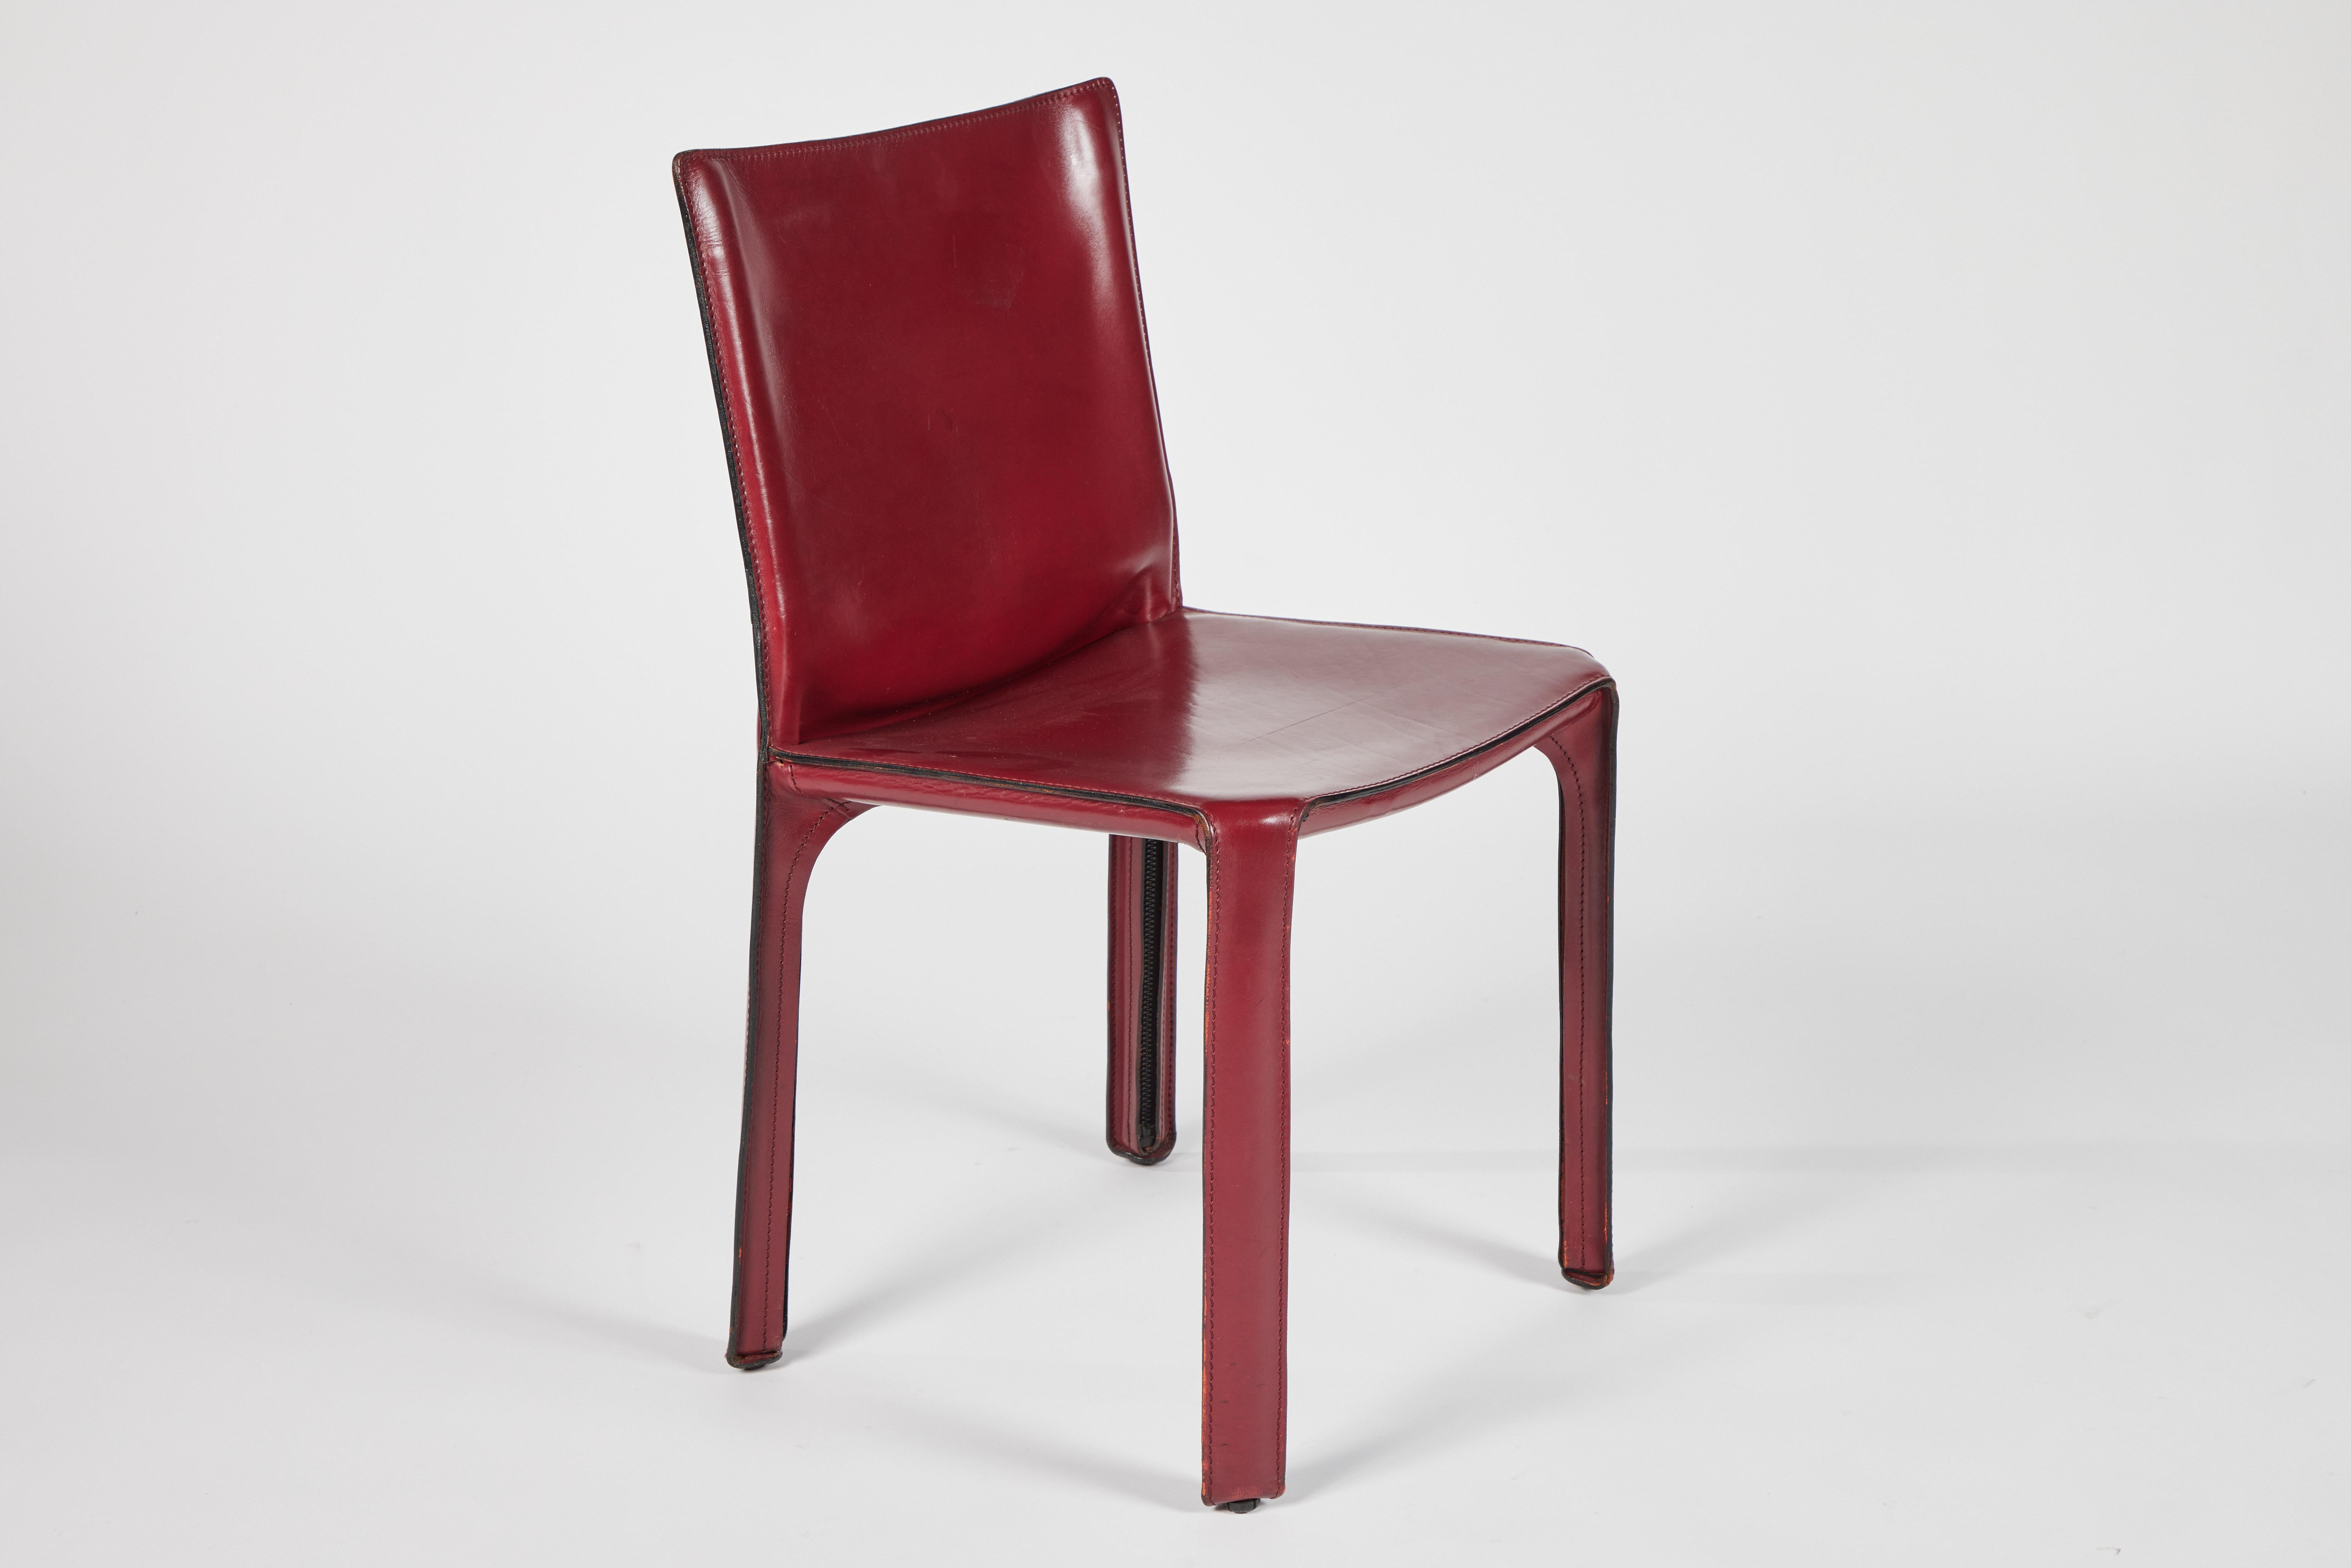 Italian Set of 10 Burgundy Cab Dining Chairs by Mario Bellini for Cassina, 1977